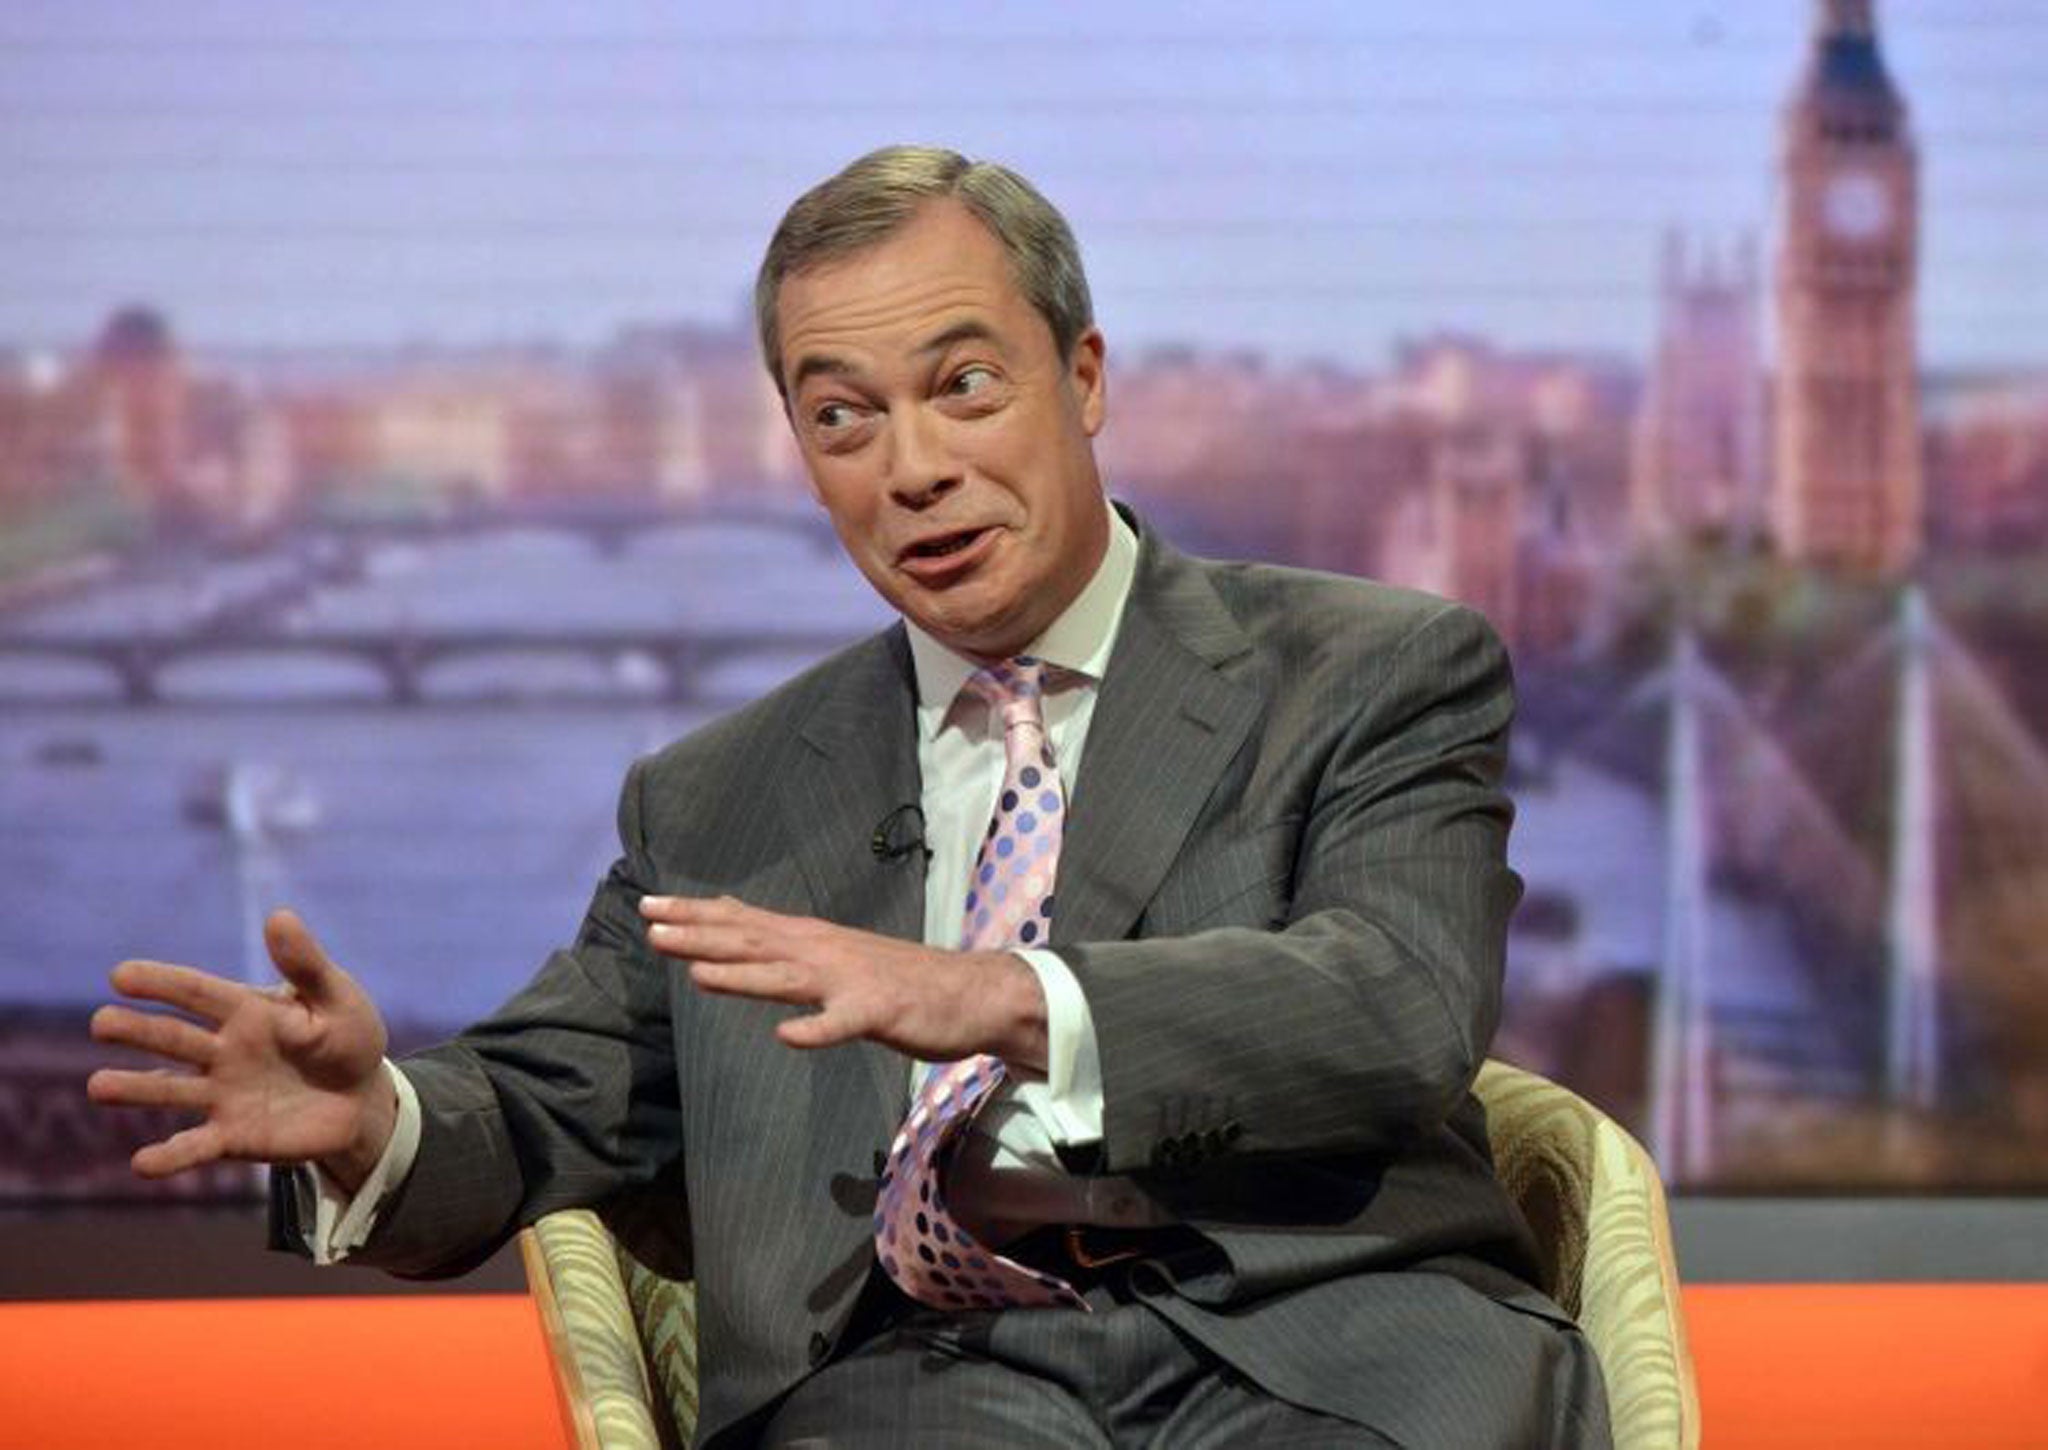 UKIP leader Nigel Farage on set for The Andrew Marr Show for BBC television, in London on 4 May 2014. Mr Farage hopes that success in the European elections will pave the way for the party to win seats in the national elections in 2015.